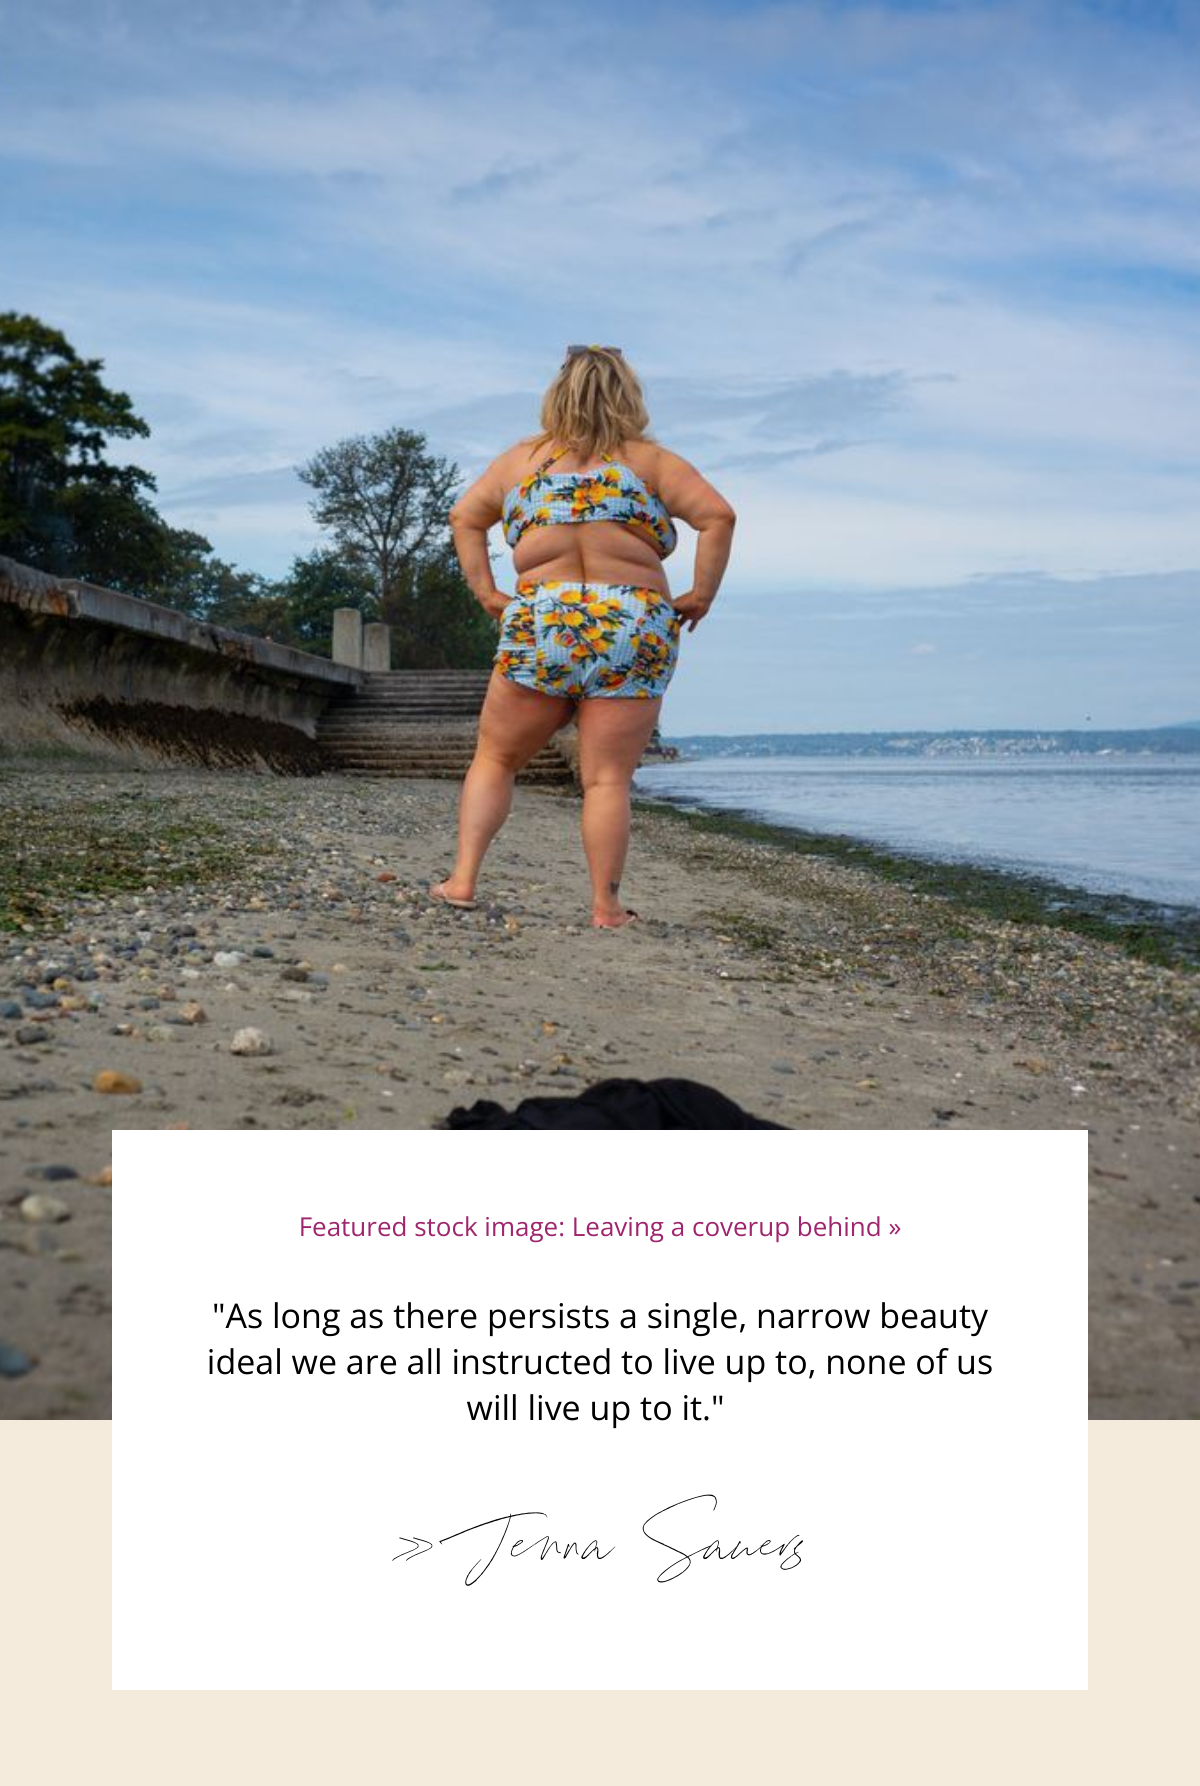 A fat white woman in a swimsuit with her back to a discarded cover-up on a beach, with a quote from Jenna Sauers that reads, "As long as there persists a single, narrow beauty ideal we are all instructed to live up to, none of us will live up to it."